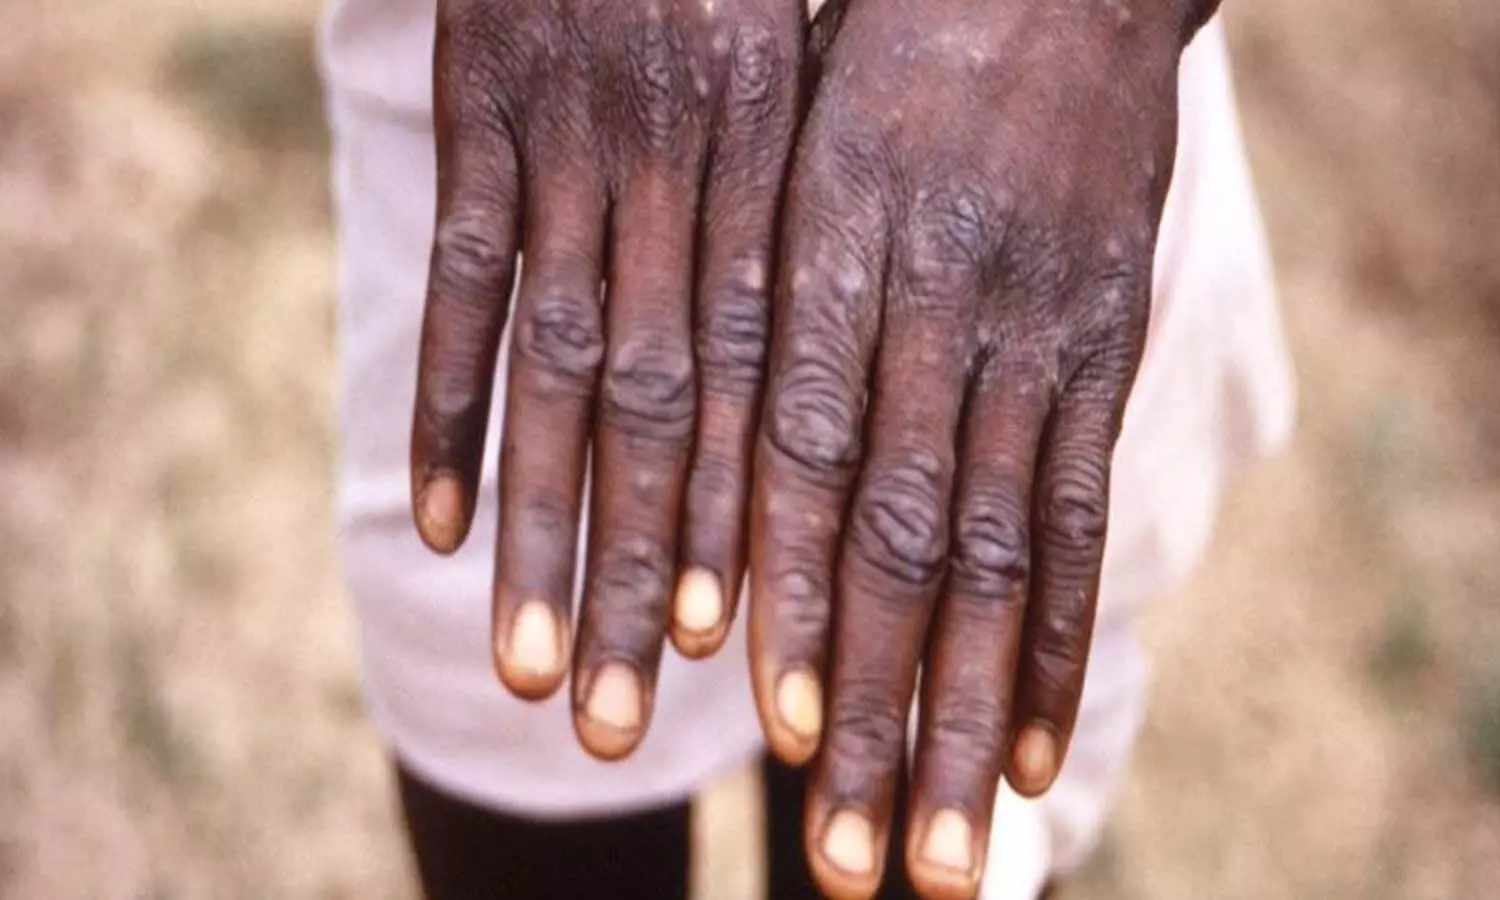 Monkeypox In Isreal: First case of monkeypox confirmed in Israel, man came from Western Europe